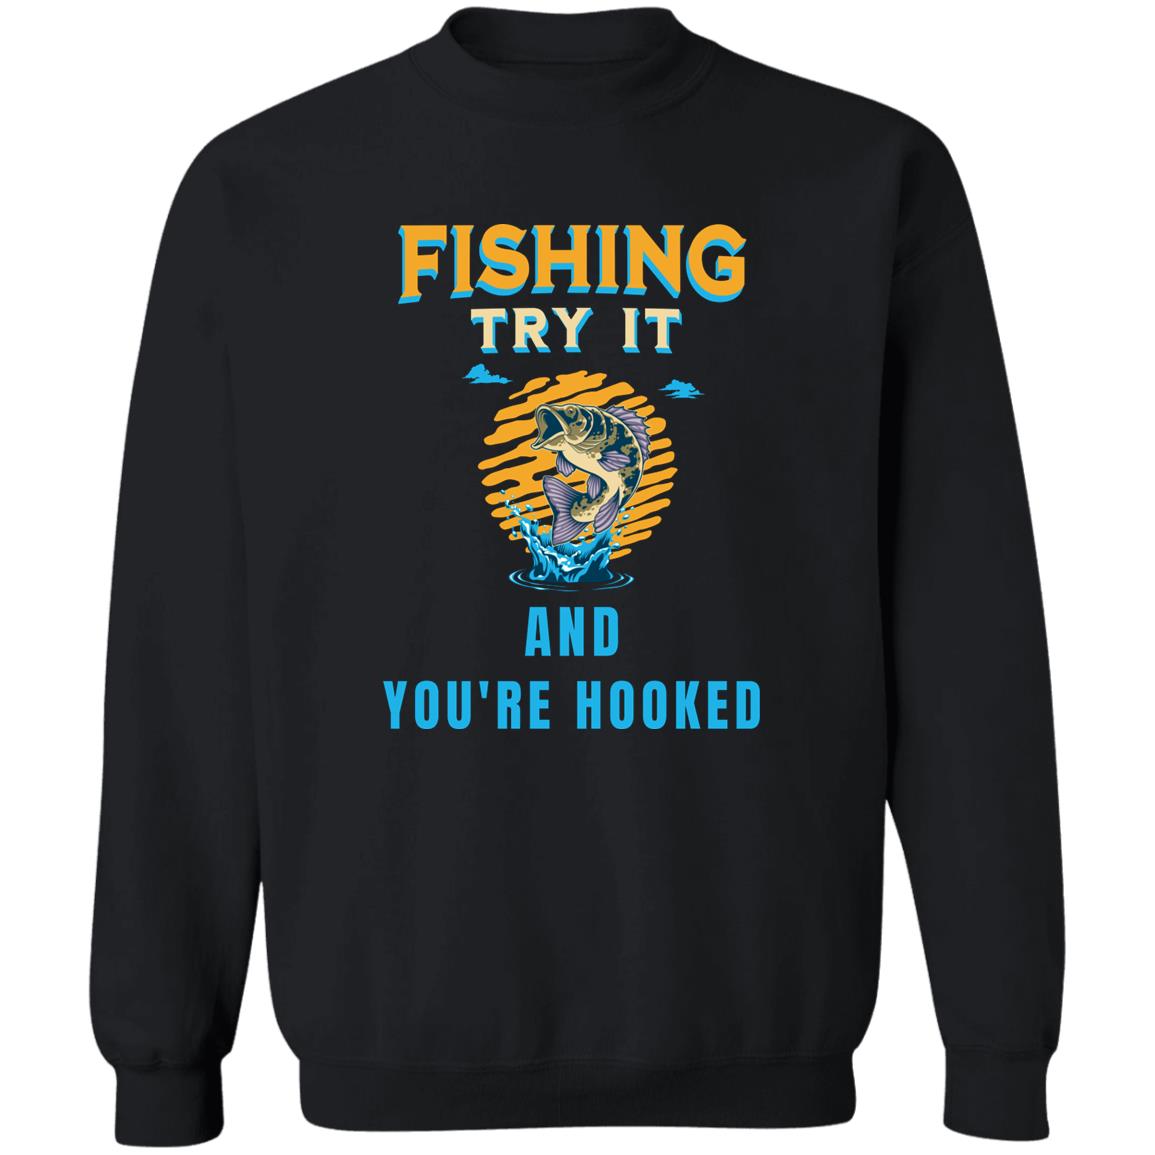 Fishing try it and you're hooked k sweatshirt black